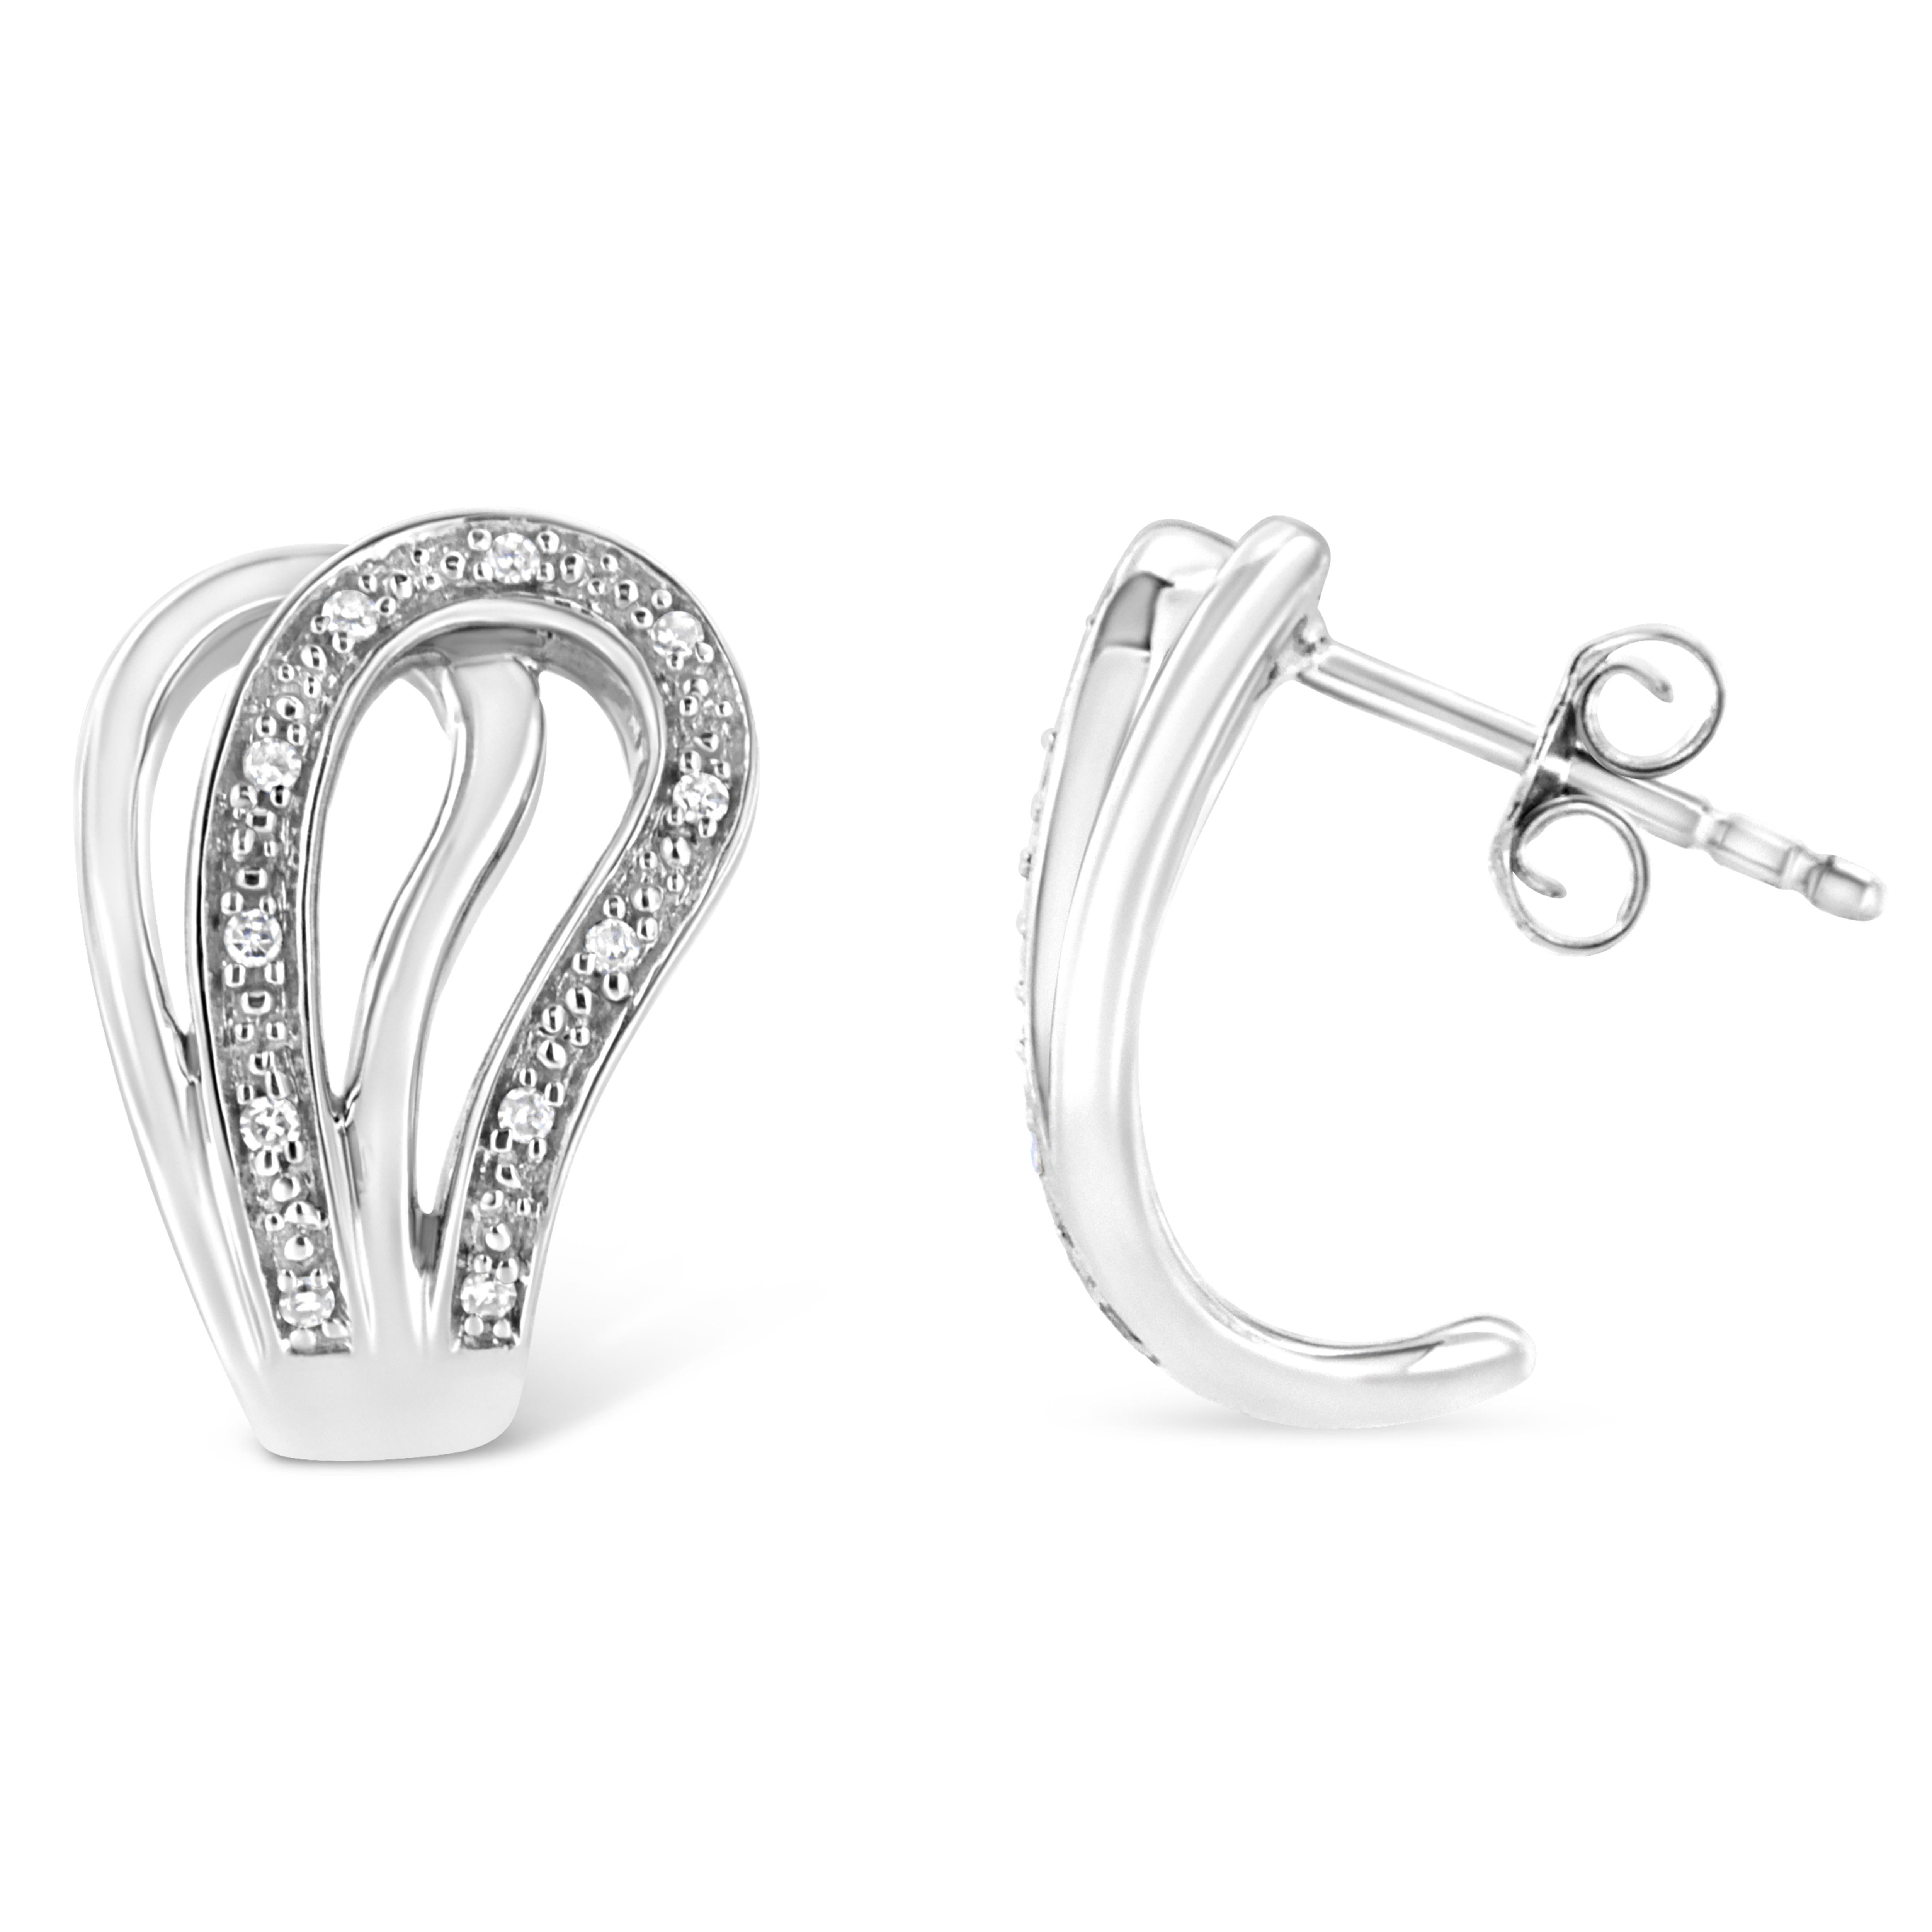 Make her stand out with these unique horseshoe diamond earrings. Fashioned in lustrous sterling silver these intricately designed earrings showcases two curved lines, one smooth sterling silver and the other sterling silver studded with 22 pave set